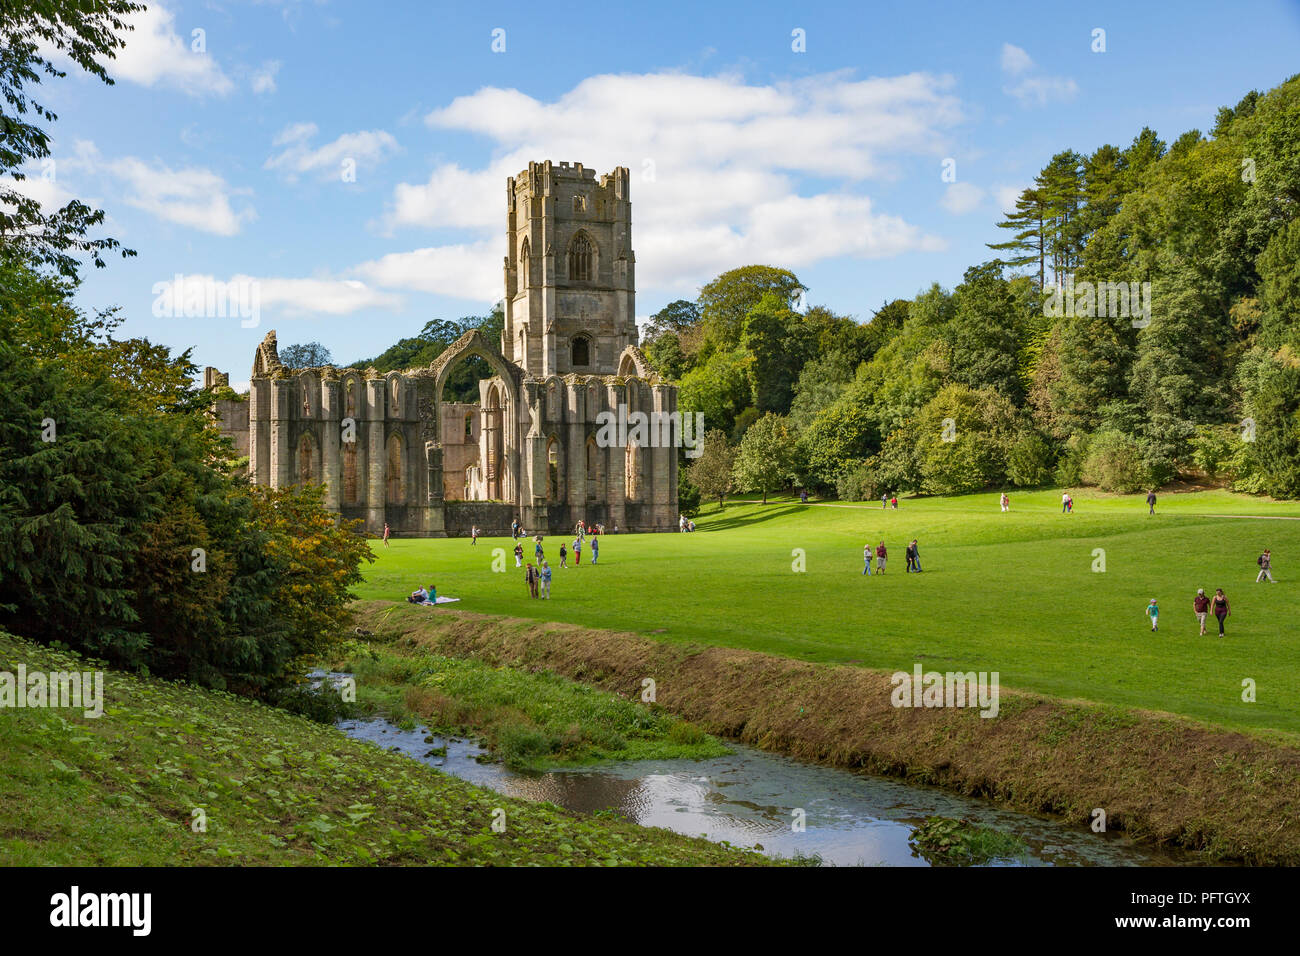 Fountains Abbey in Ripon, North Yorkshire. Stock Photo